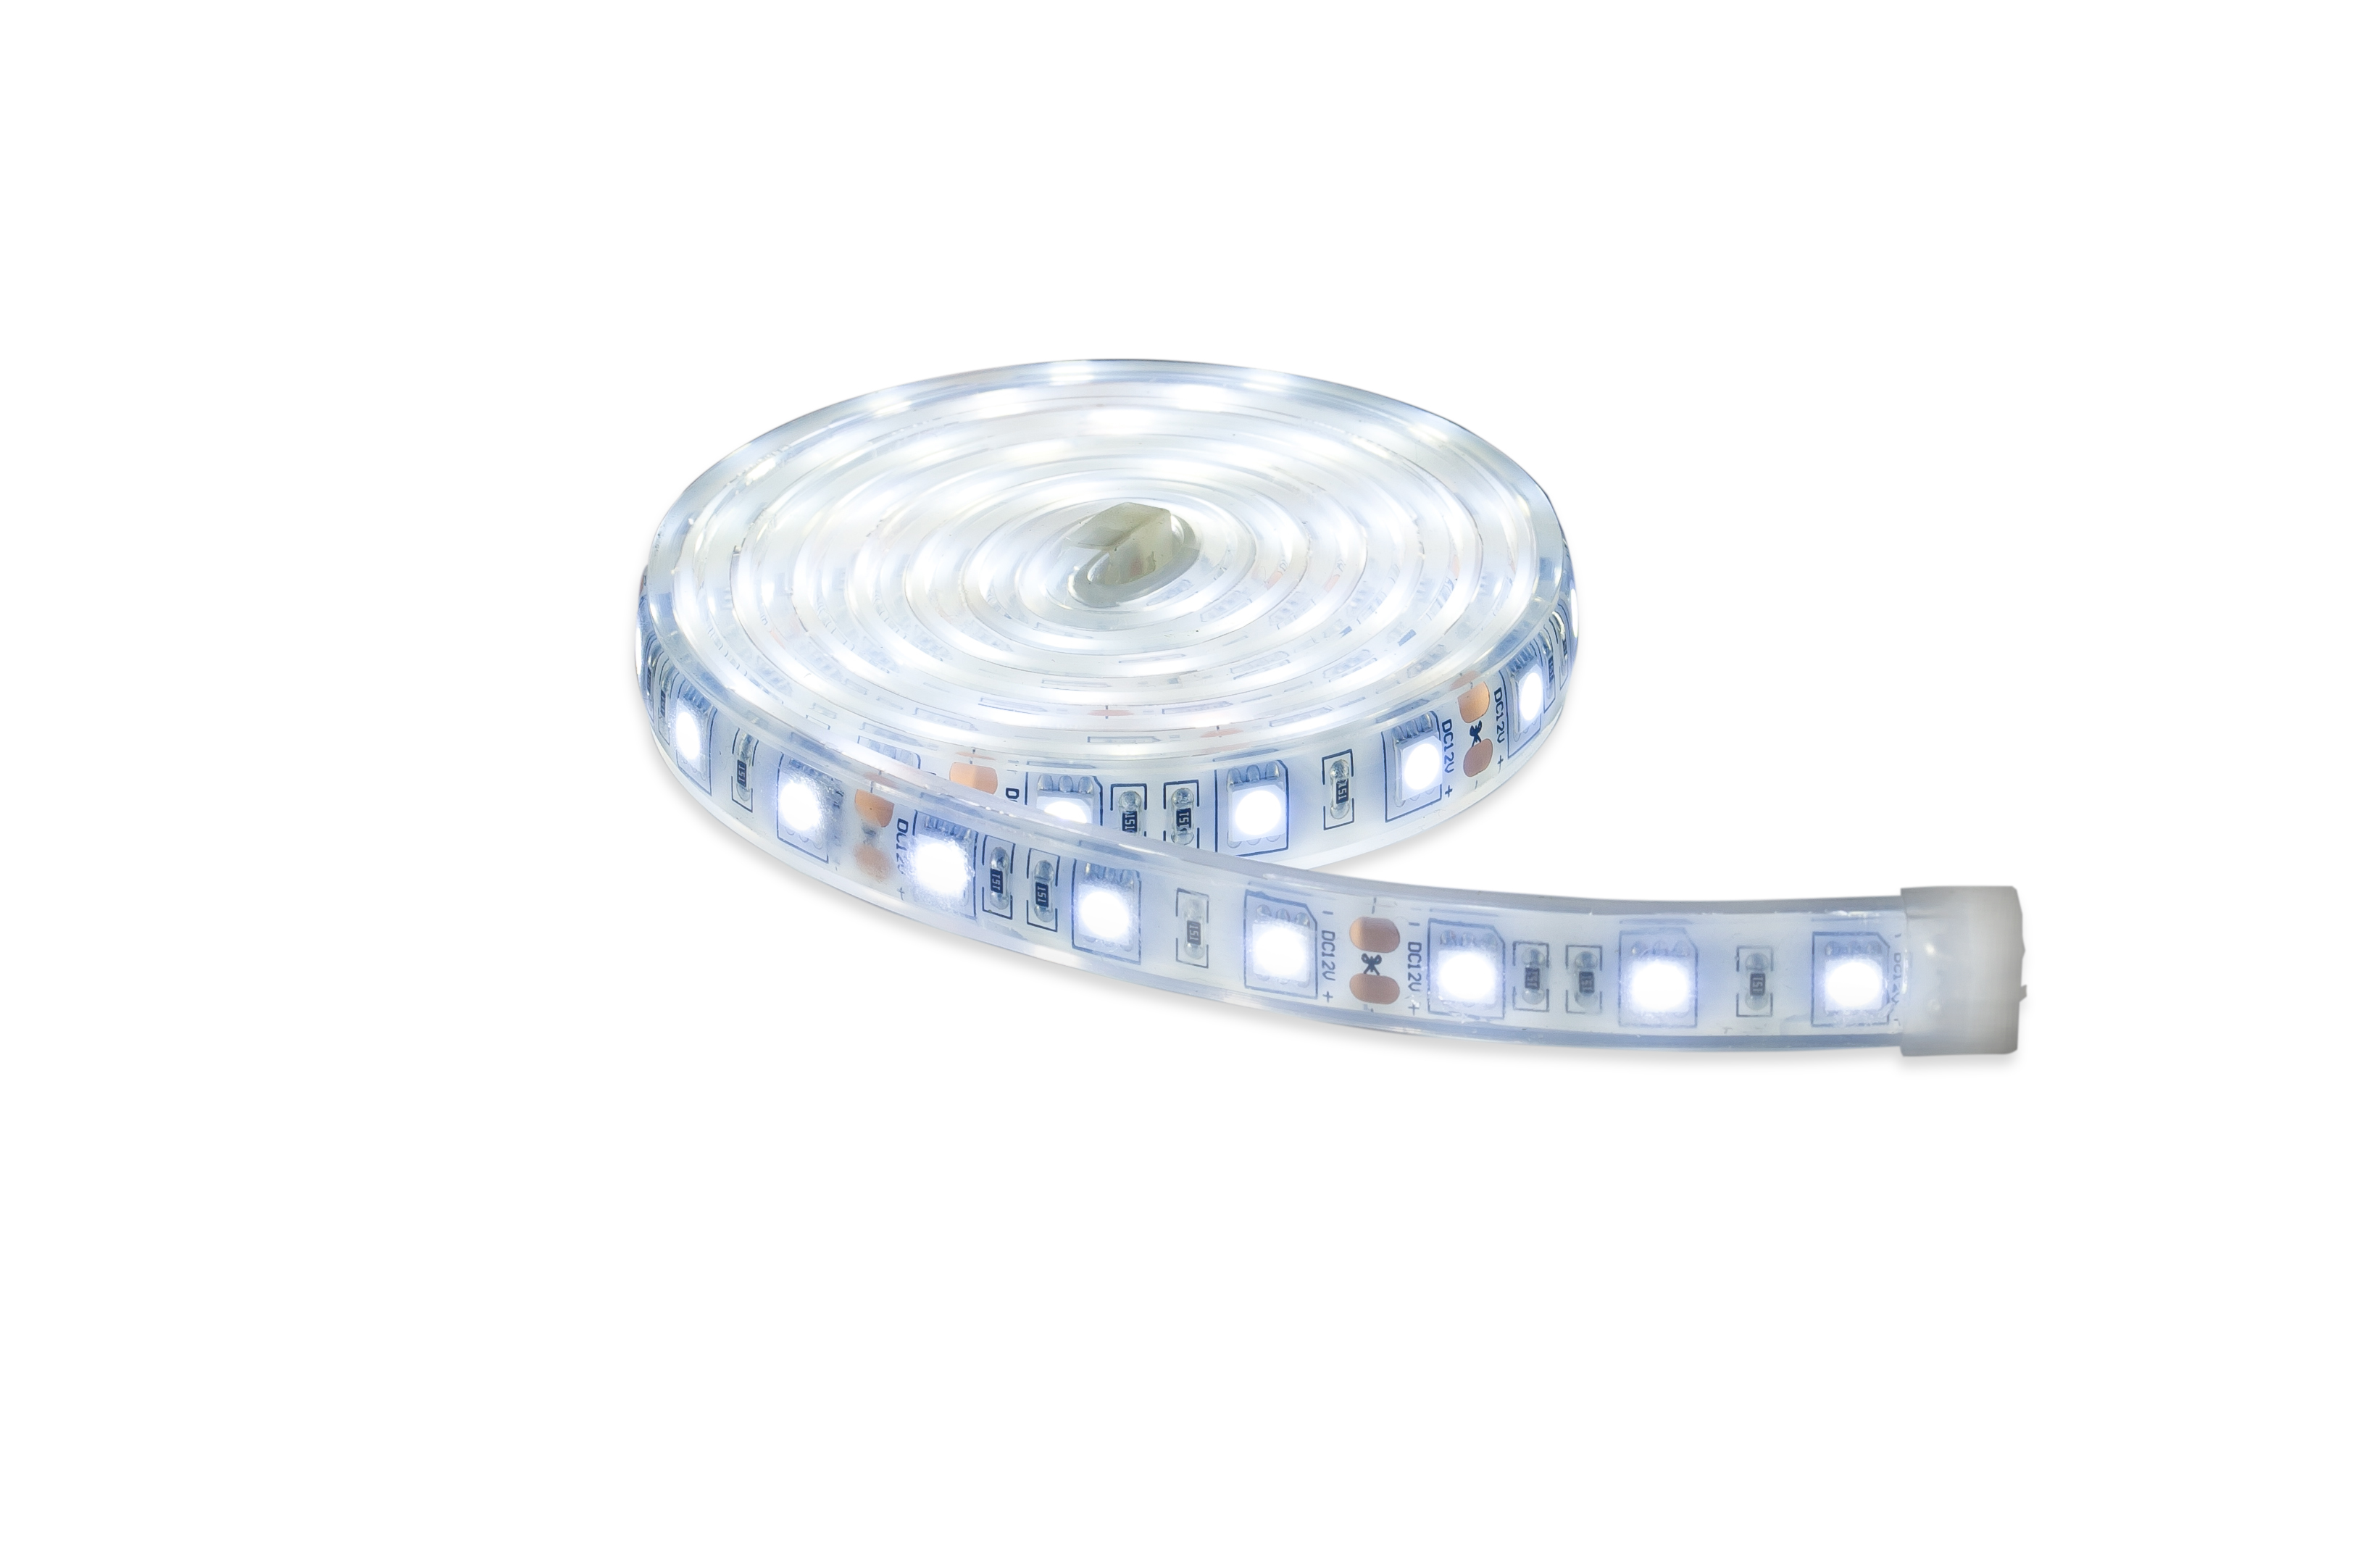 LED 12V Light Strip & Switch Questions & Answers